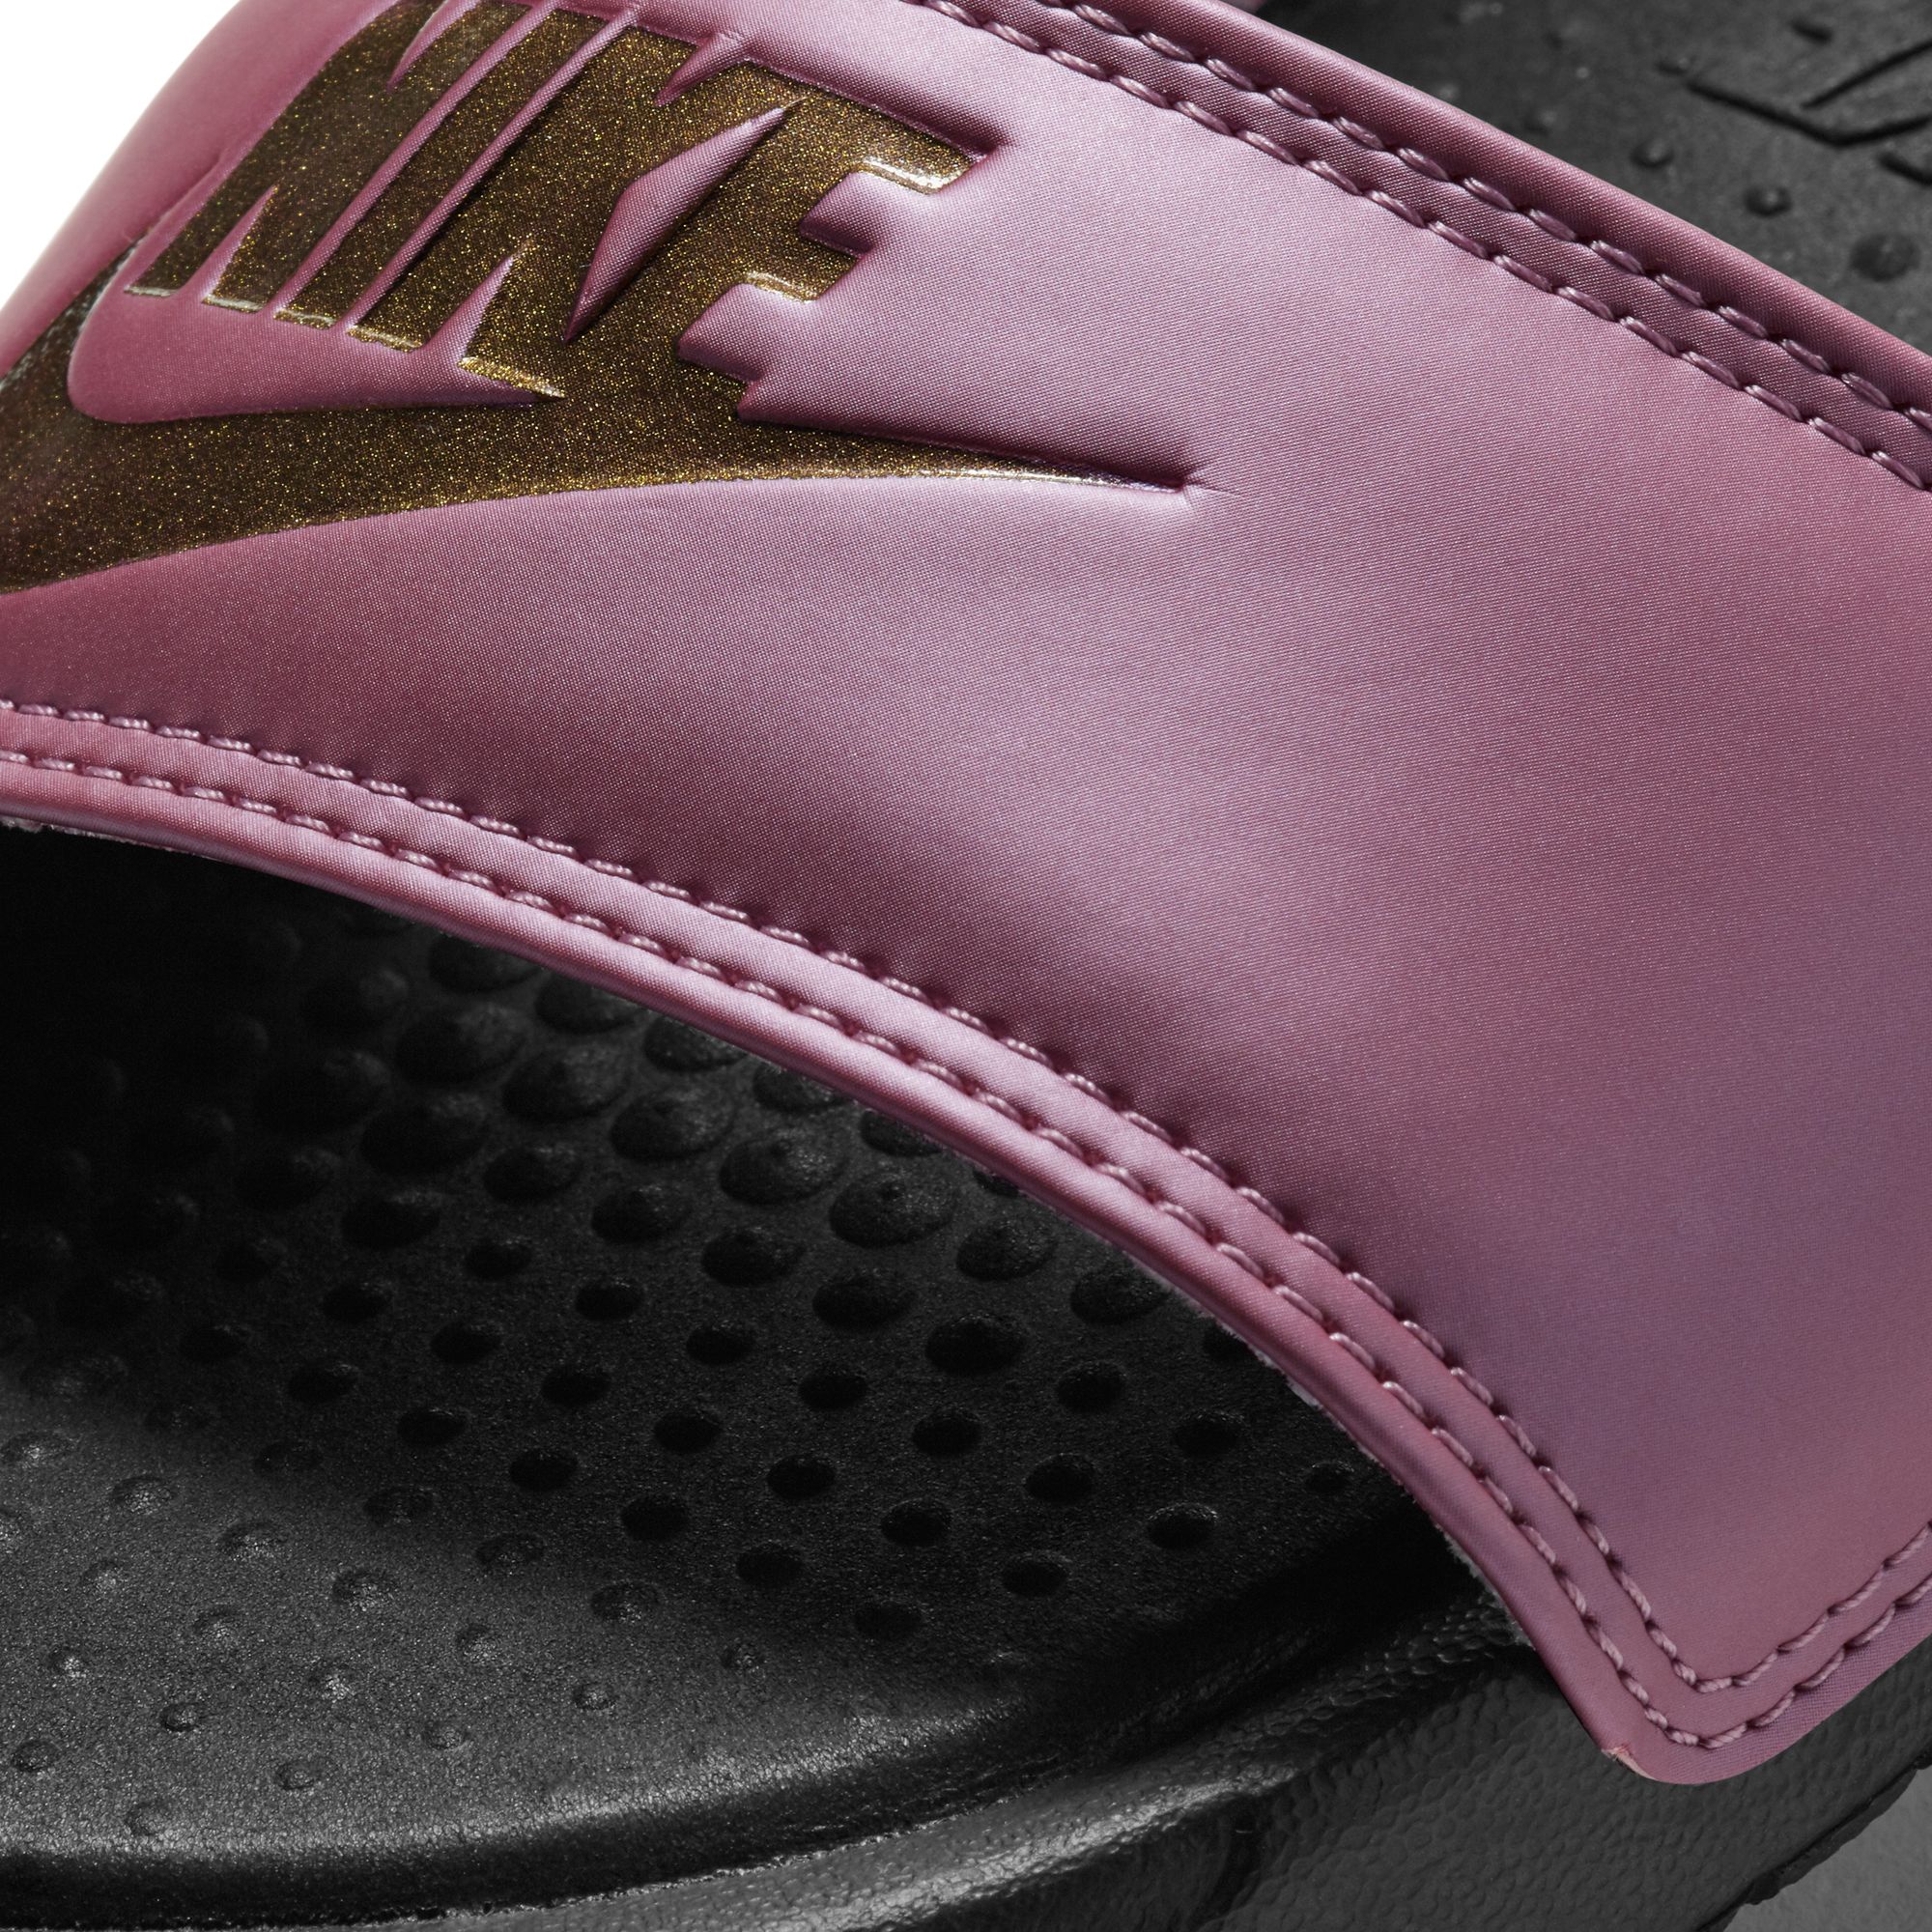 purple and gold nike slides